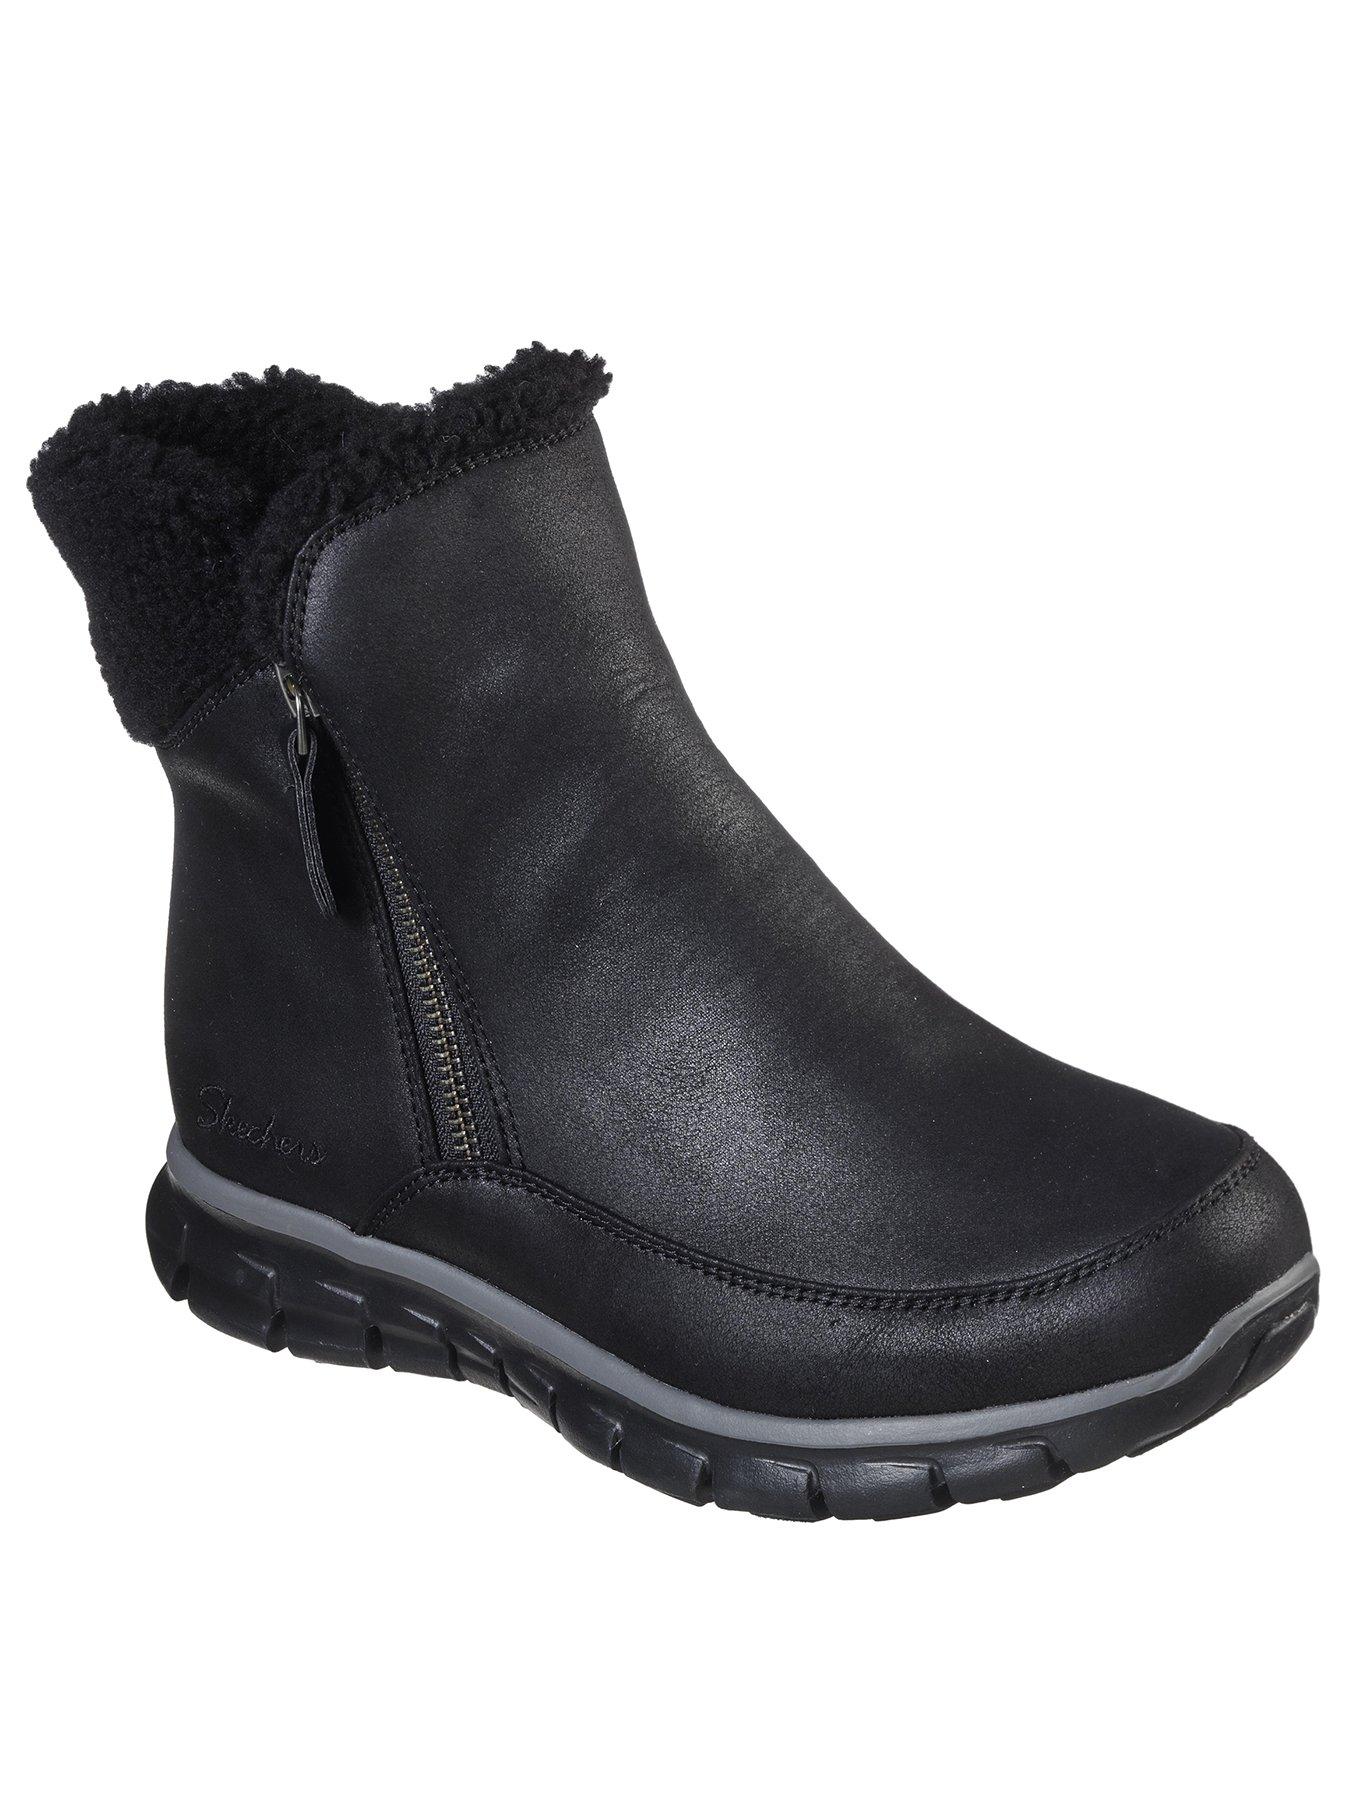 Skechers Synergy Ankle Boot - Black 